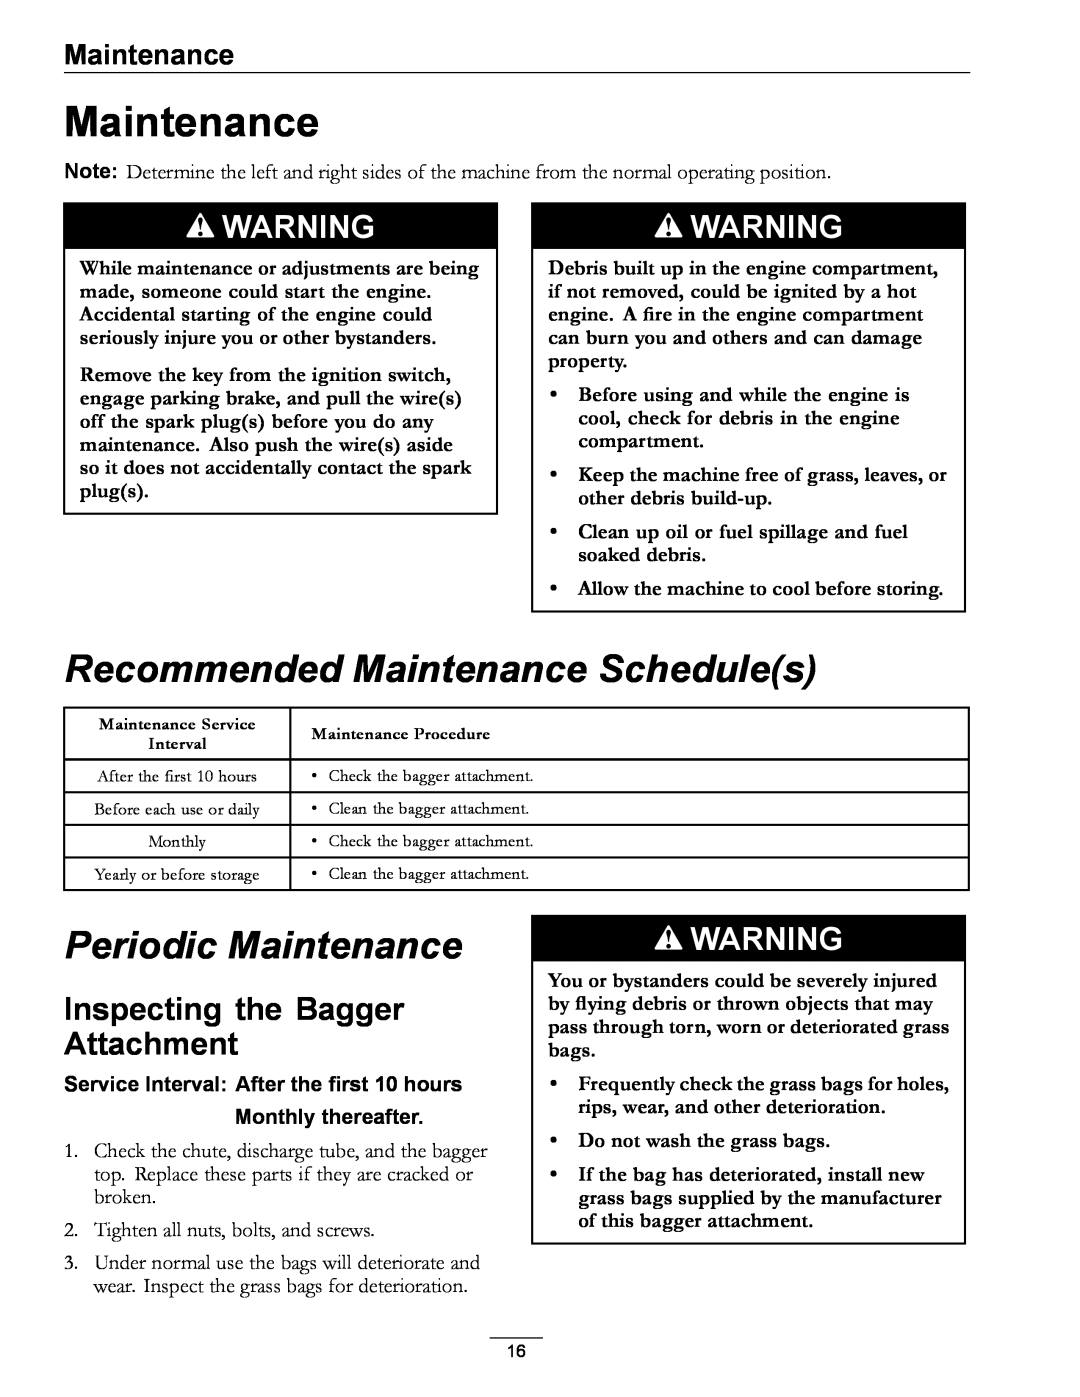 Exmark 4500-438 rev. a manual Recommended Maintenance Schedules, Periodic Maintenance, Inspecting the Bagger Attachment 